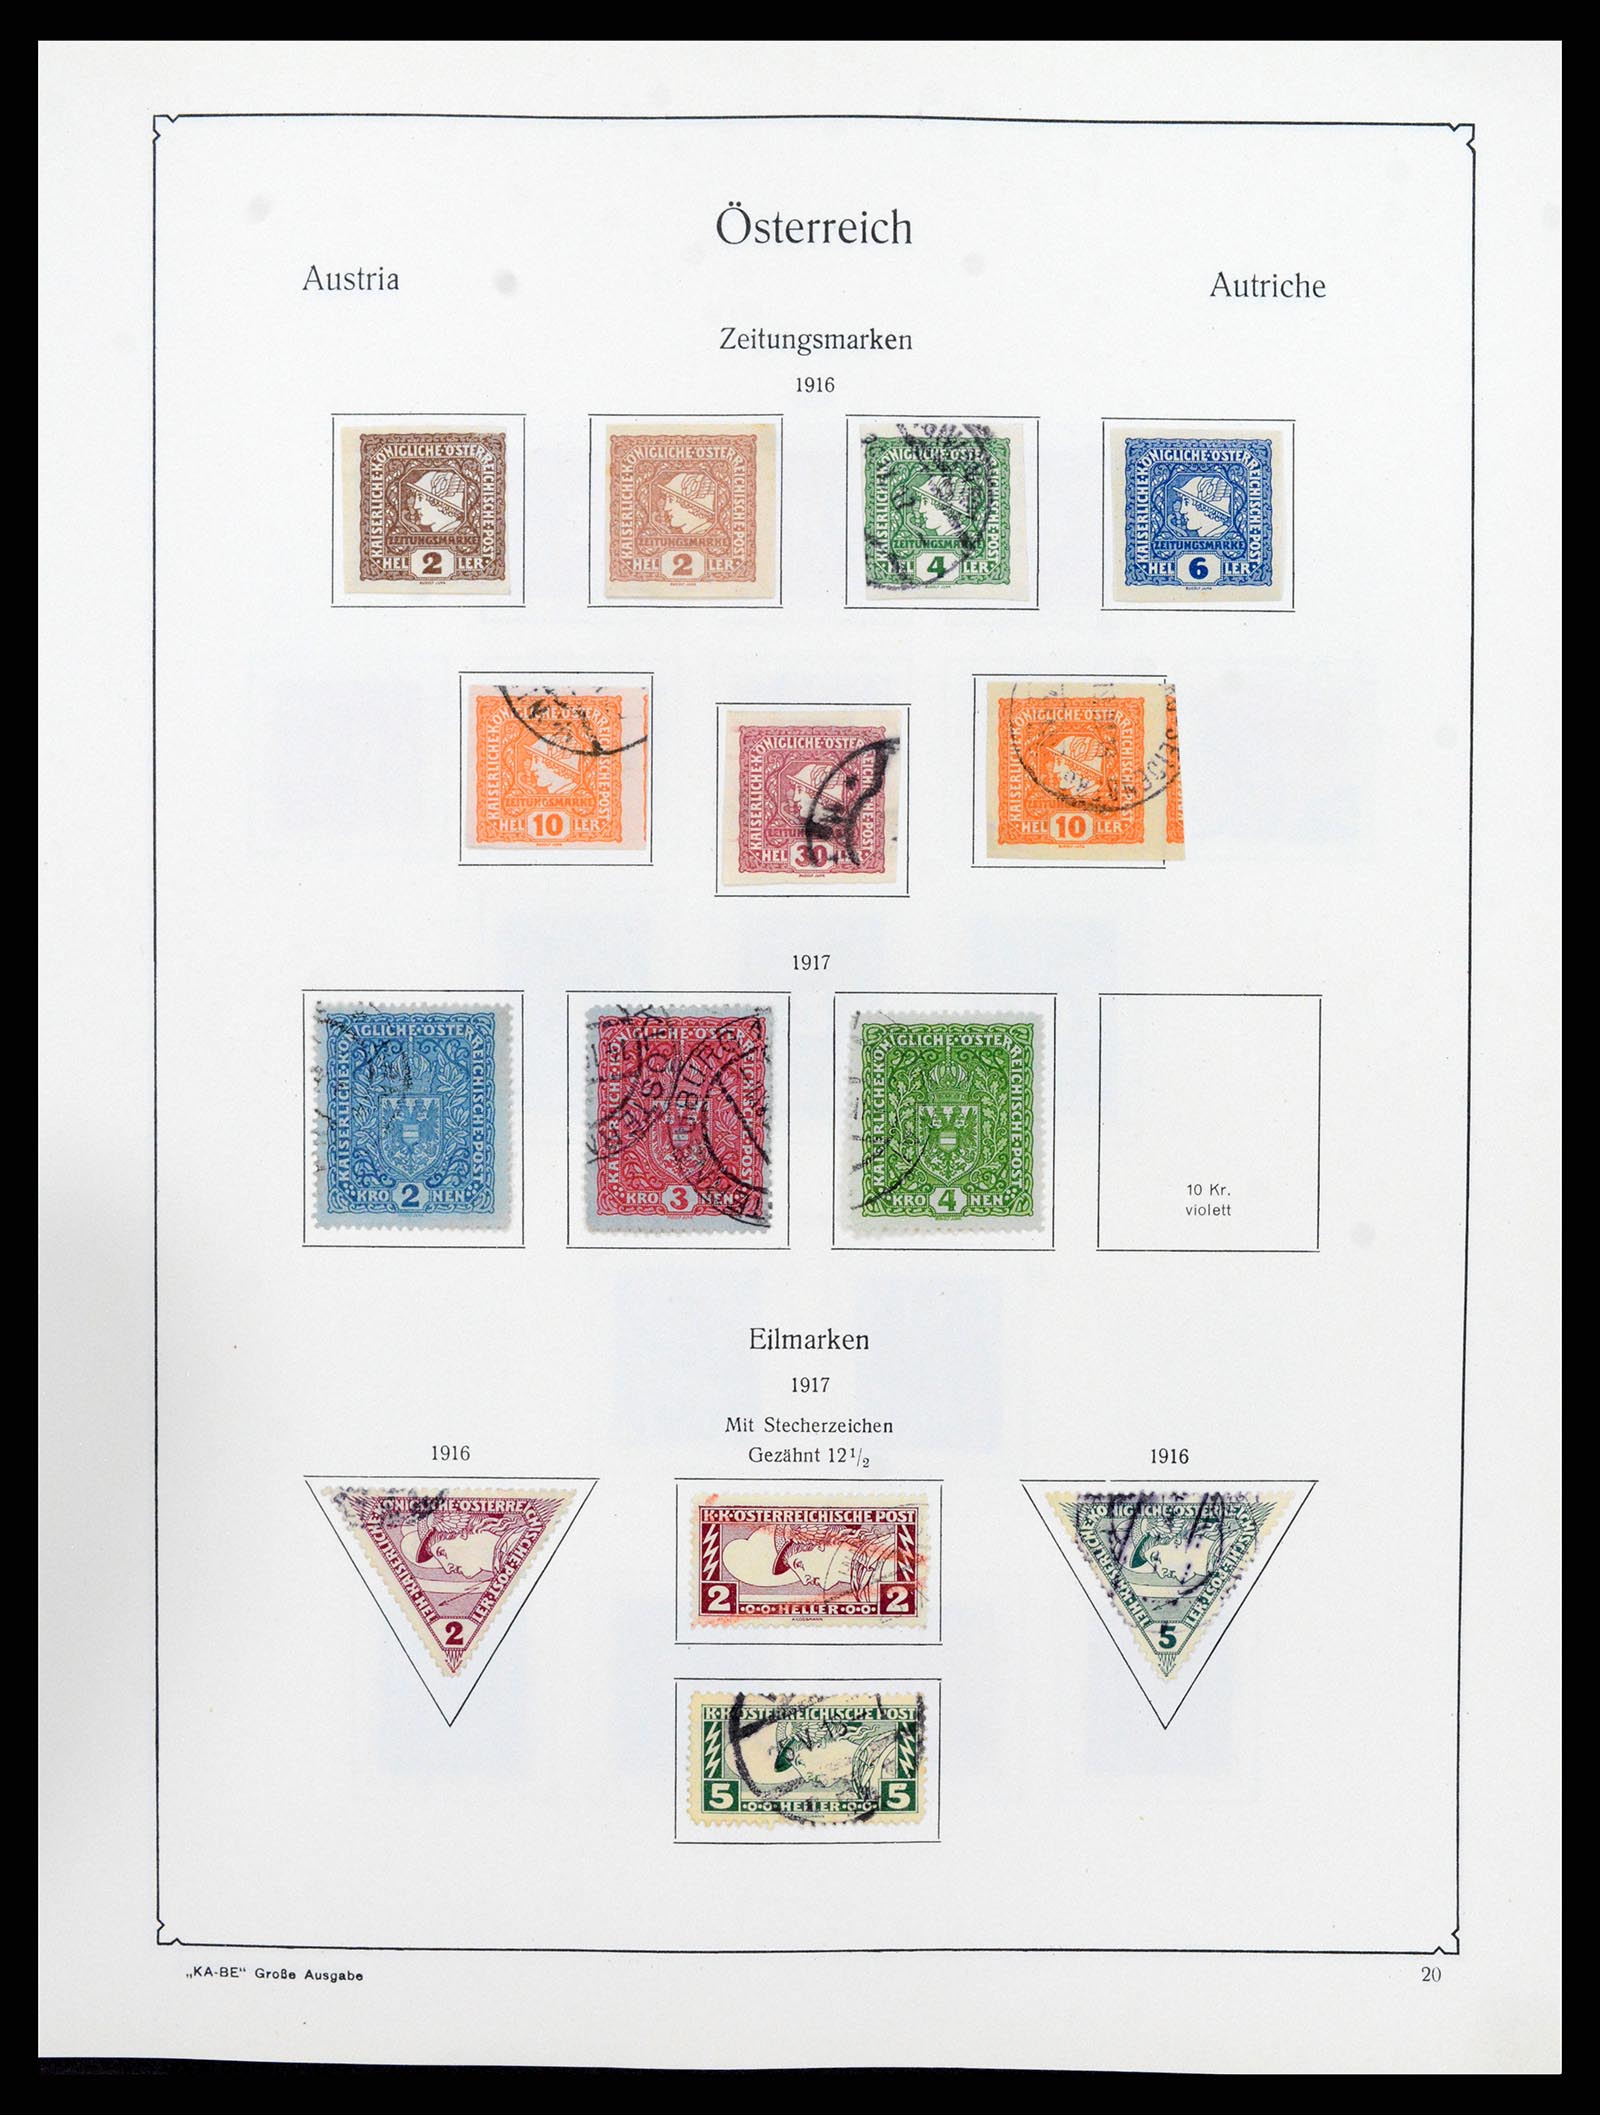 37960 025 - Stamp collection 37960 Austria and territories 1850-1984.